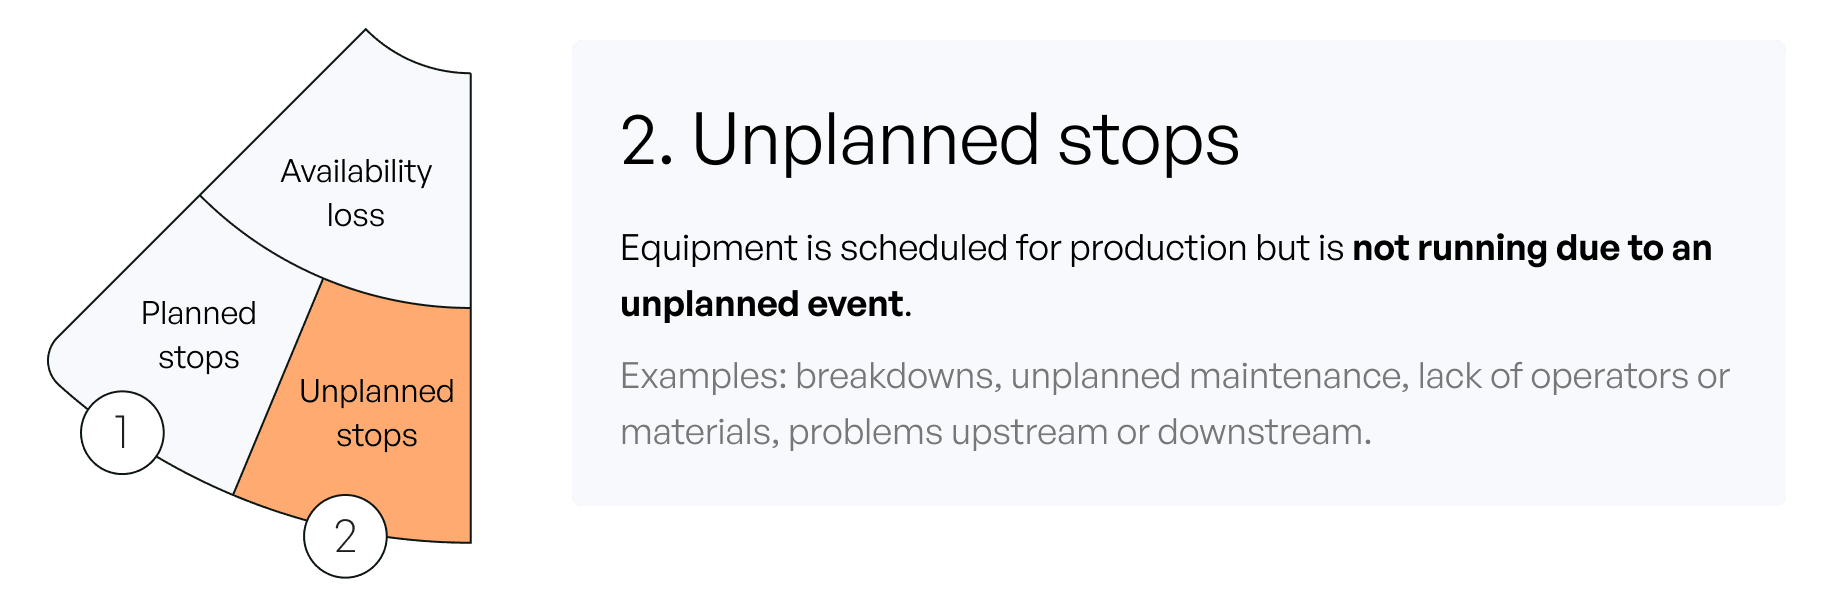 unplanned stops are when equipment is scheduled for production but not running due to unplanned event